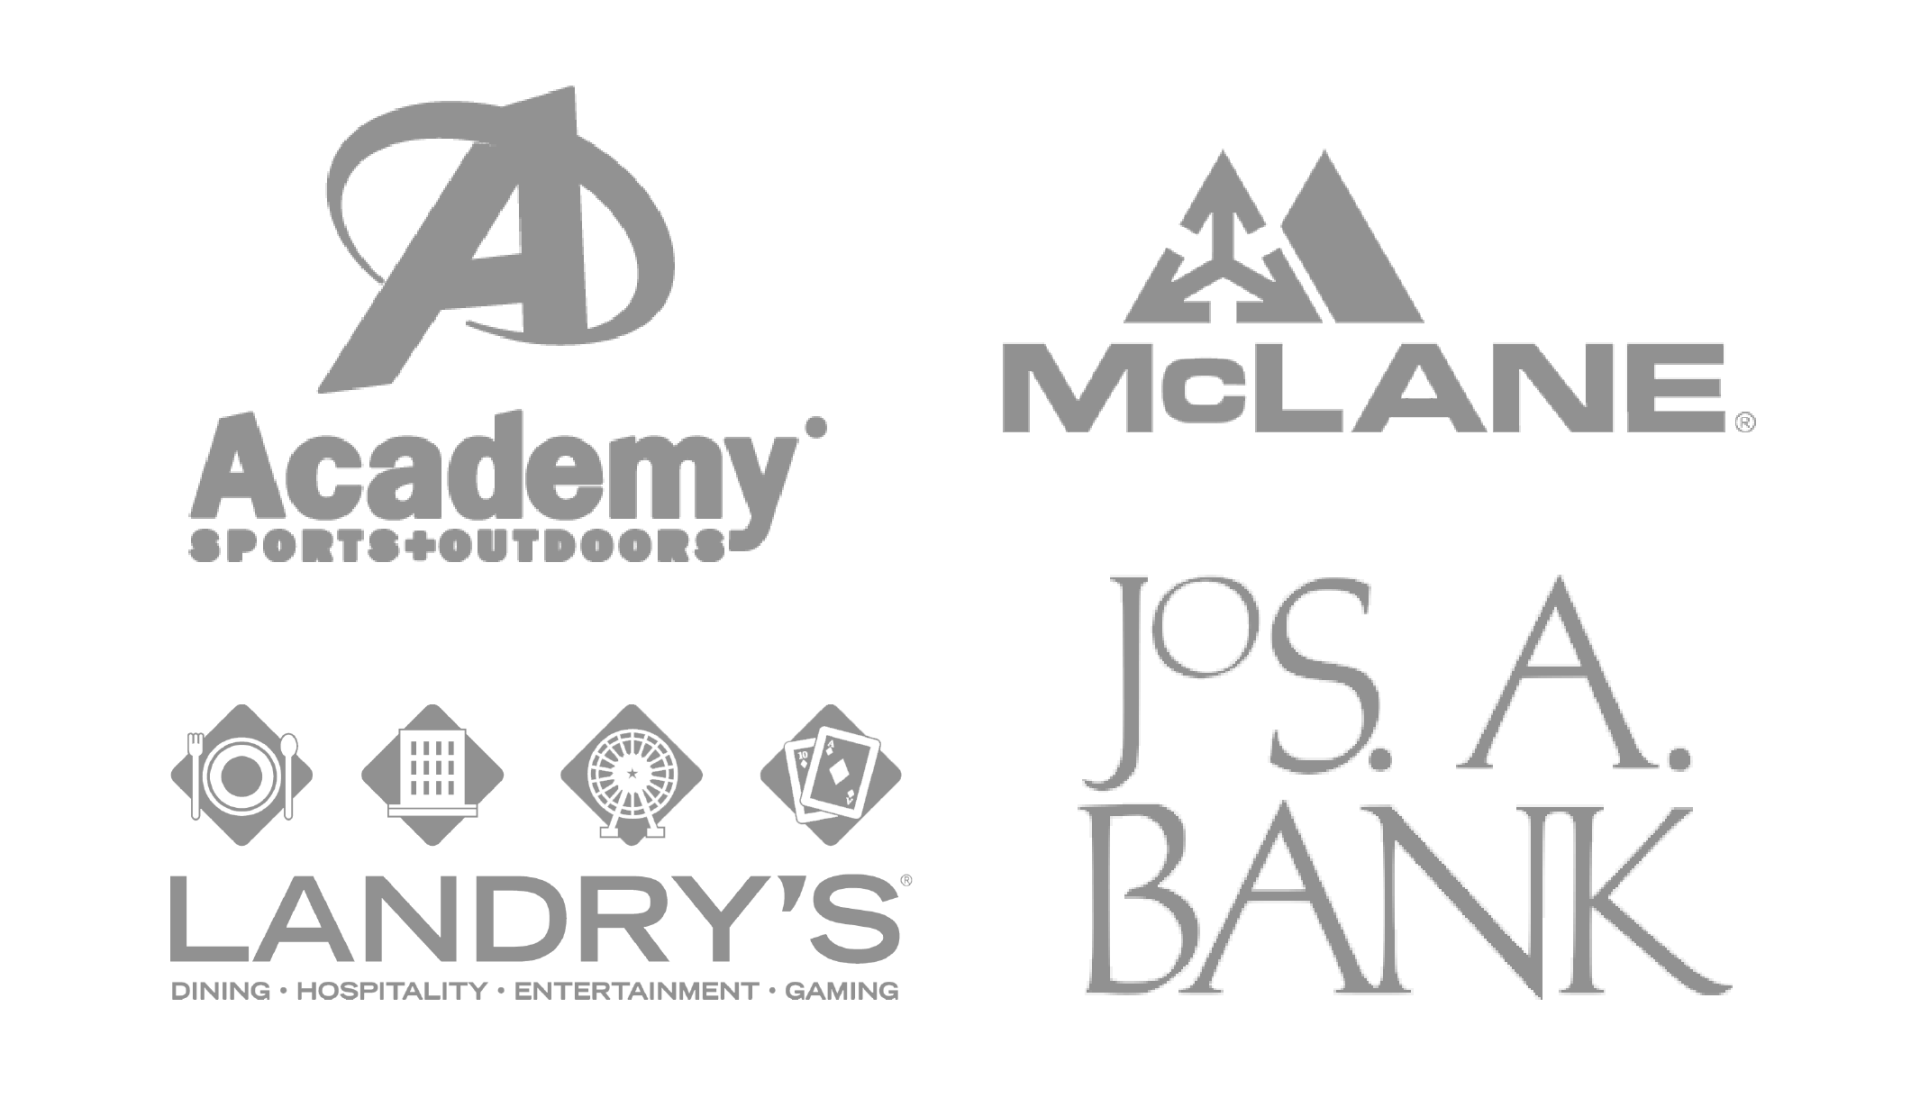 a group of logos including academy , mclane , landry 's bank , and jos a bank .